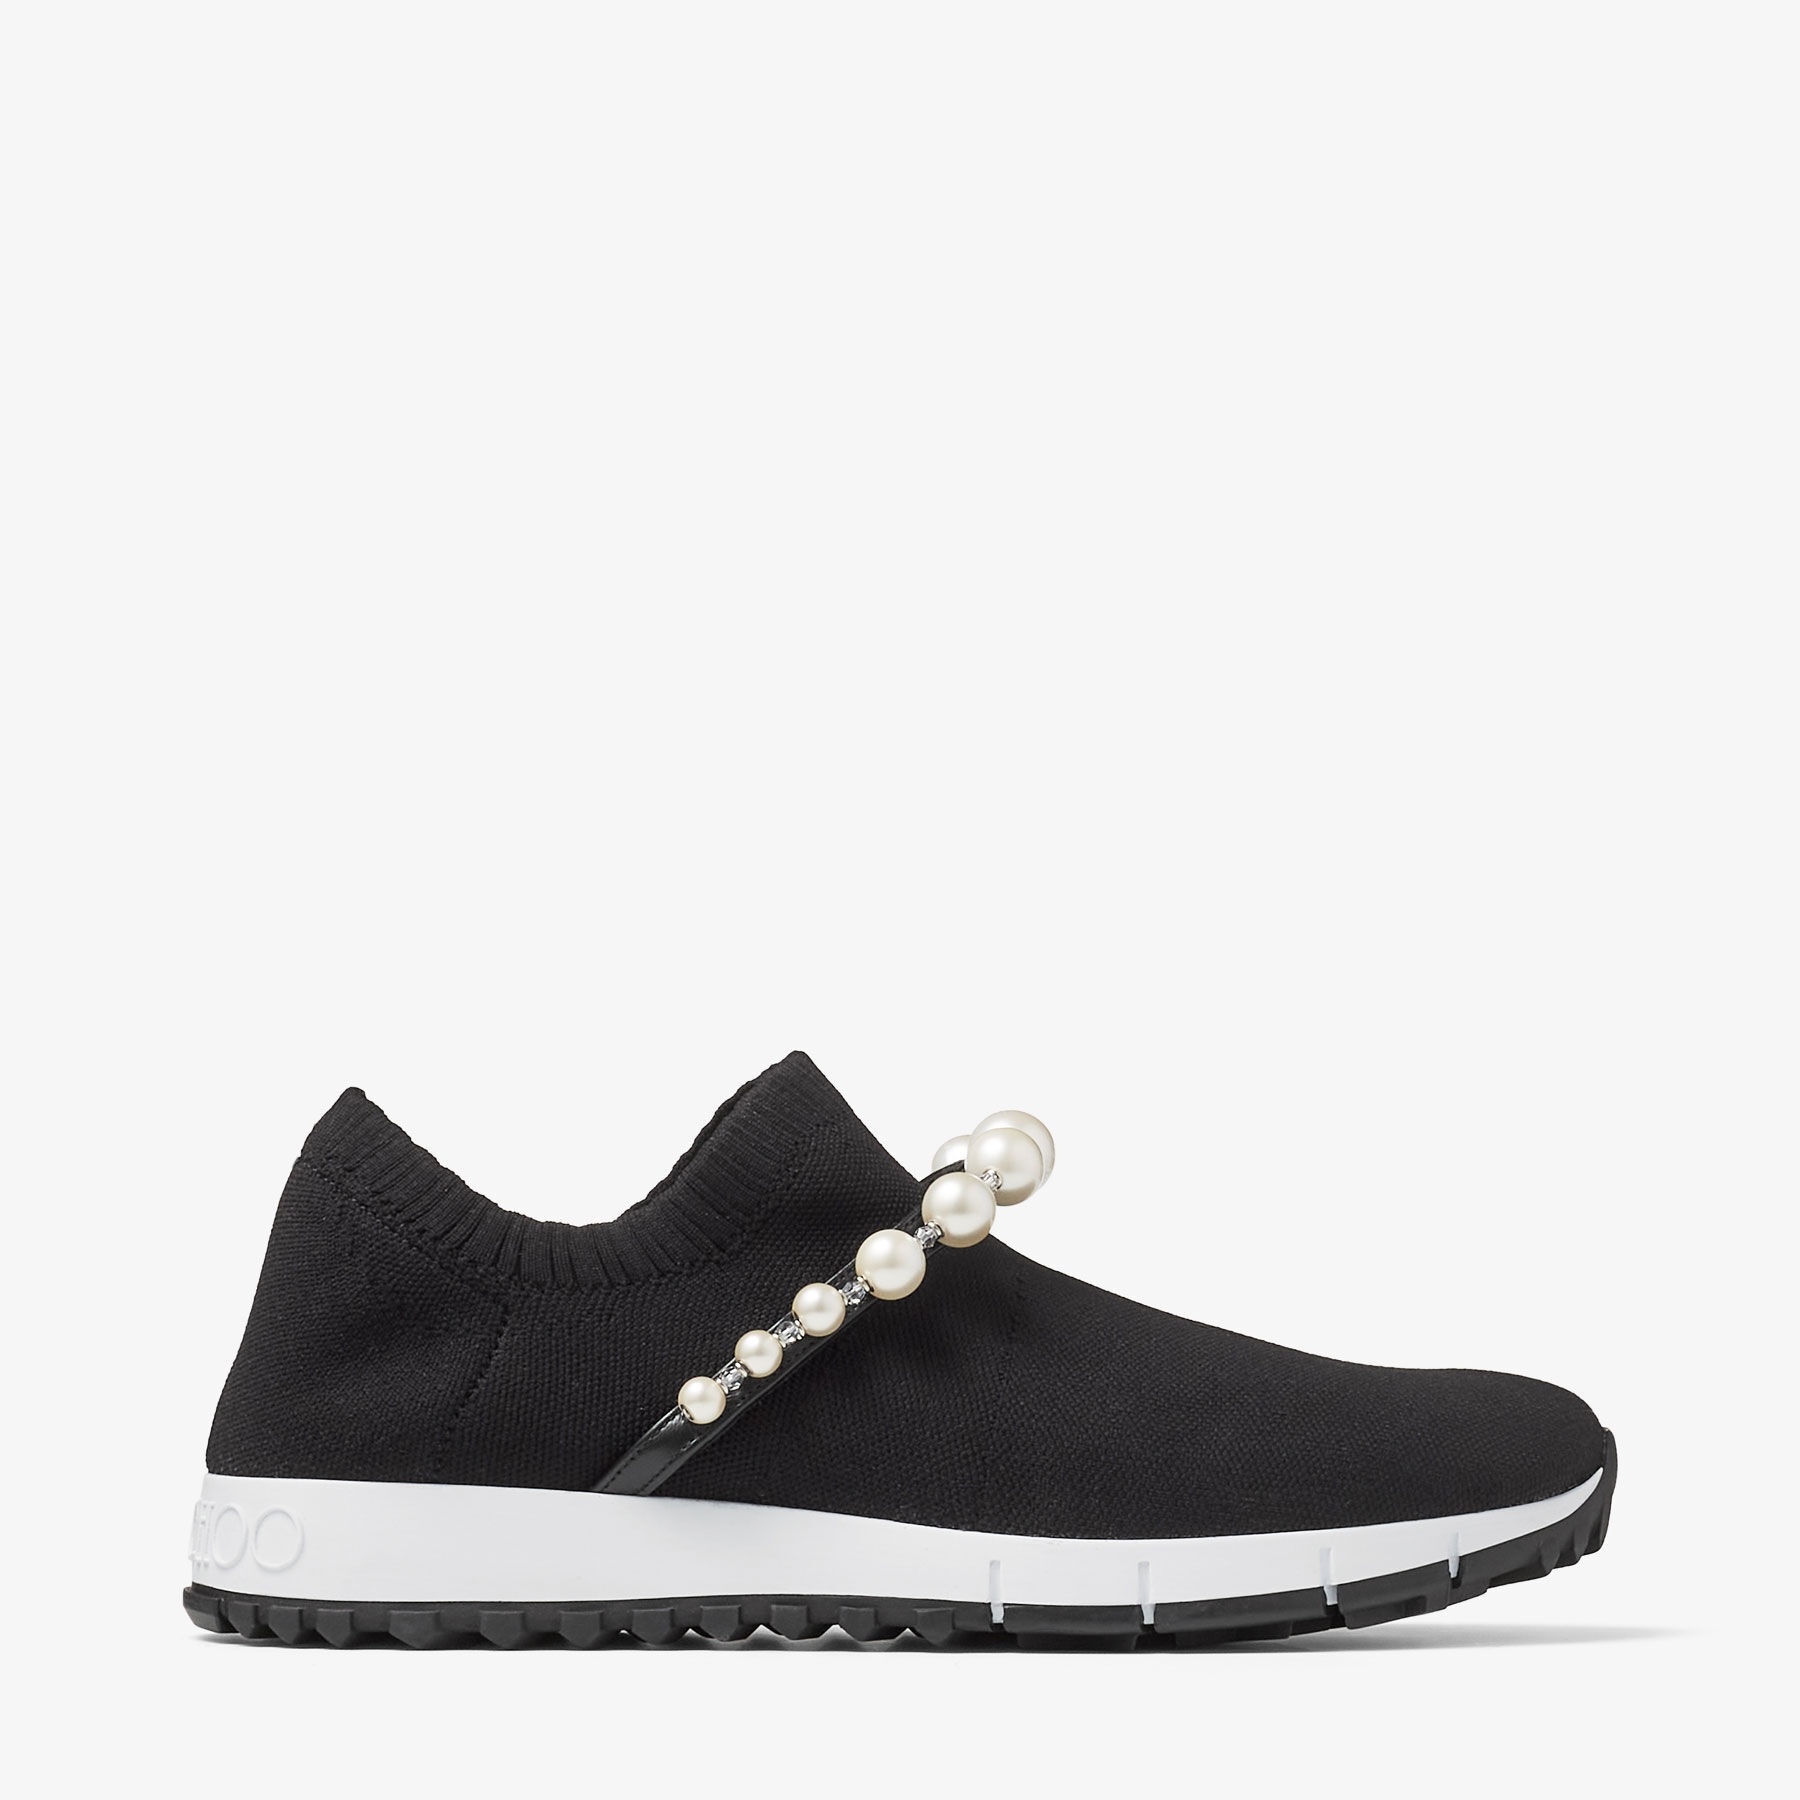 Venice
Black Knit Trainers with Pearls - 1